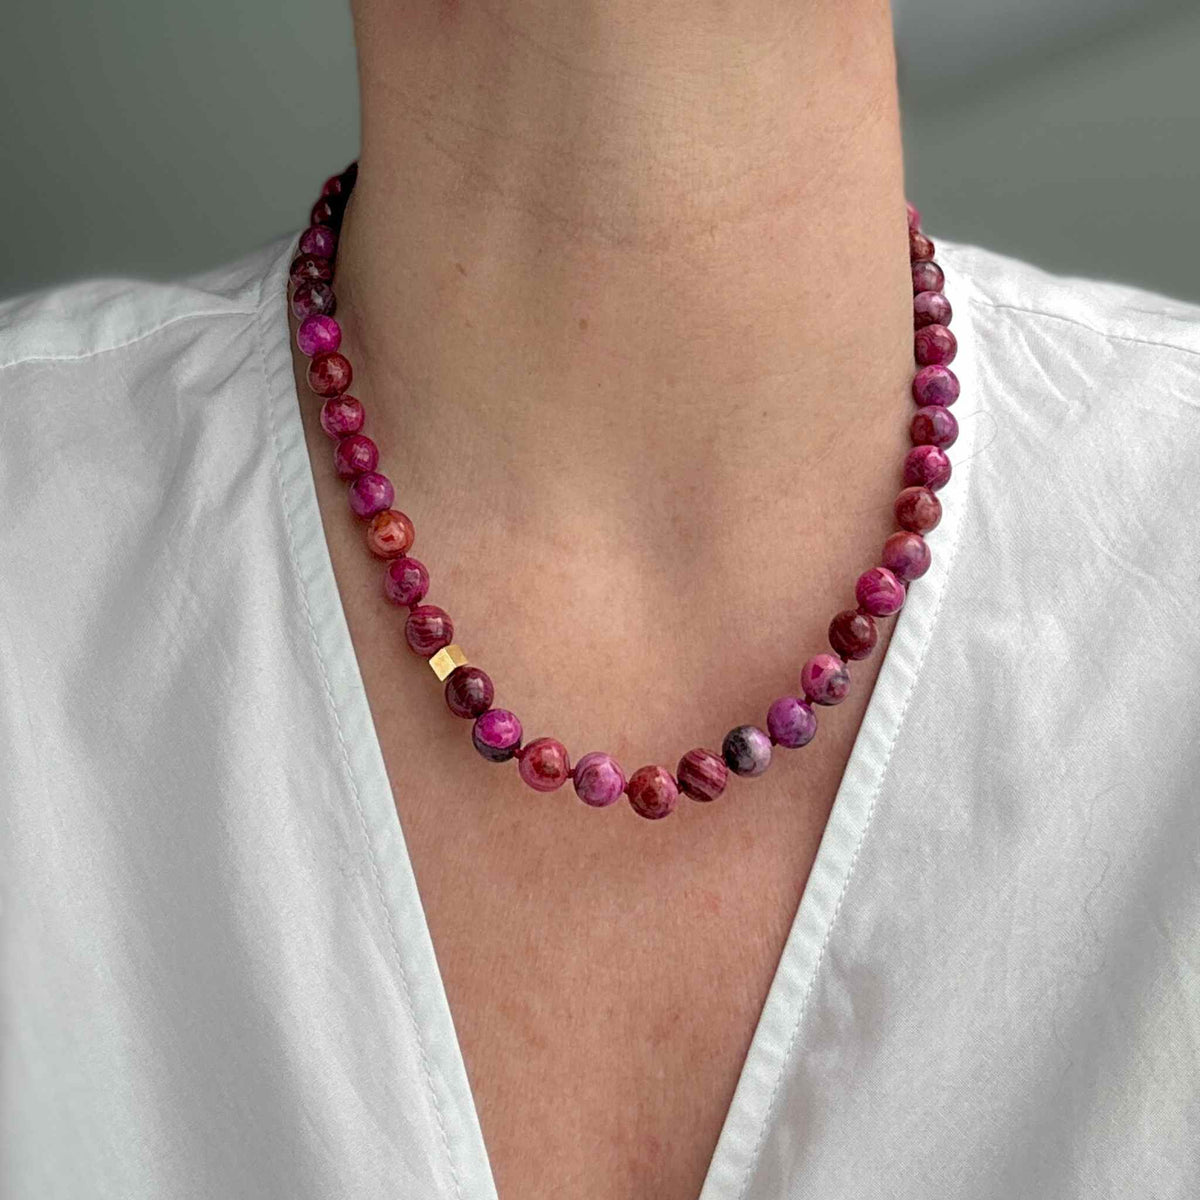 Pink agate necklace beaded modelled against white shirt